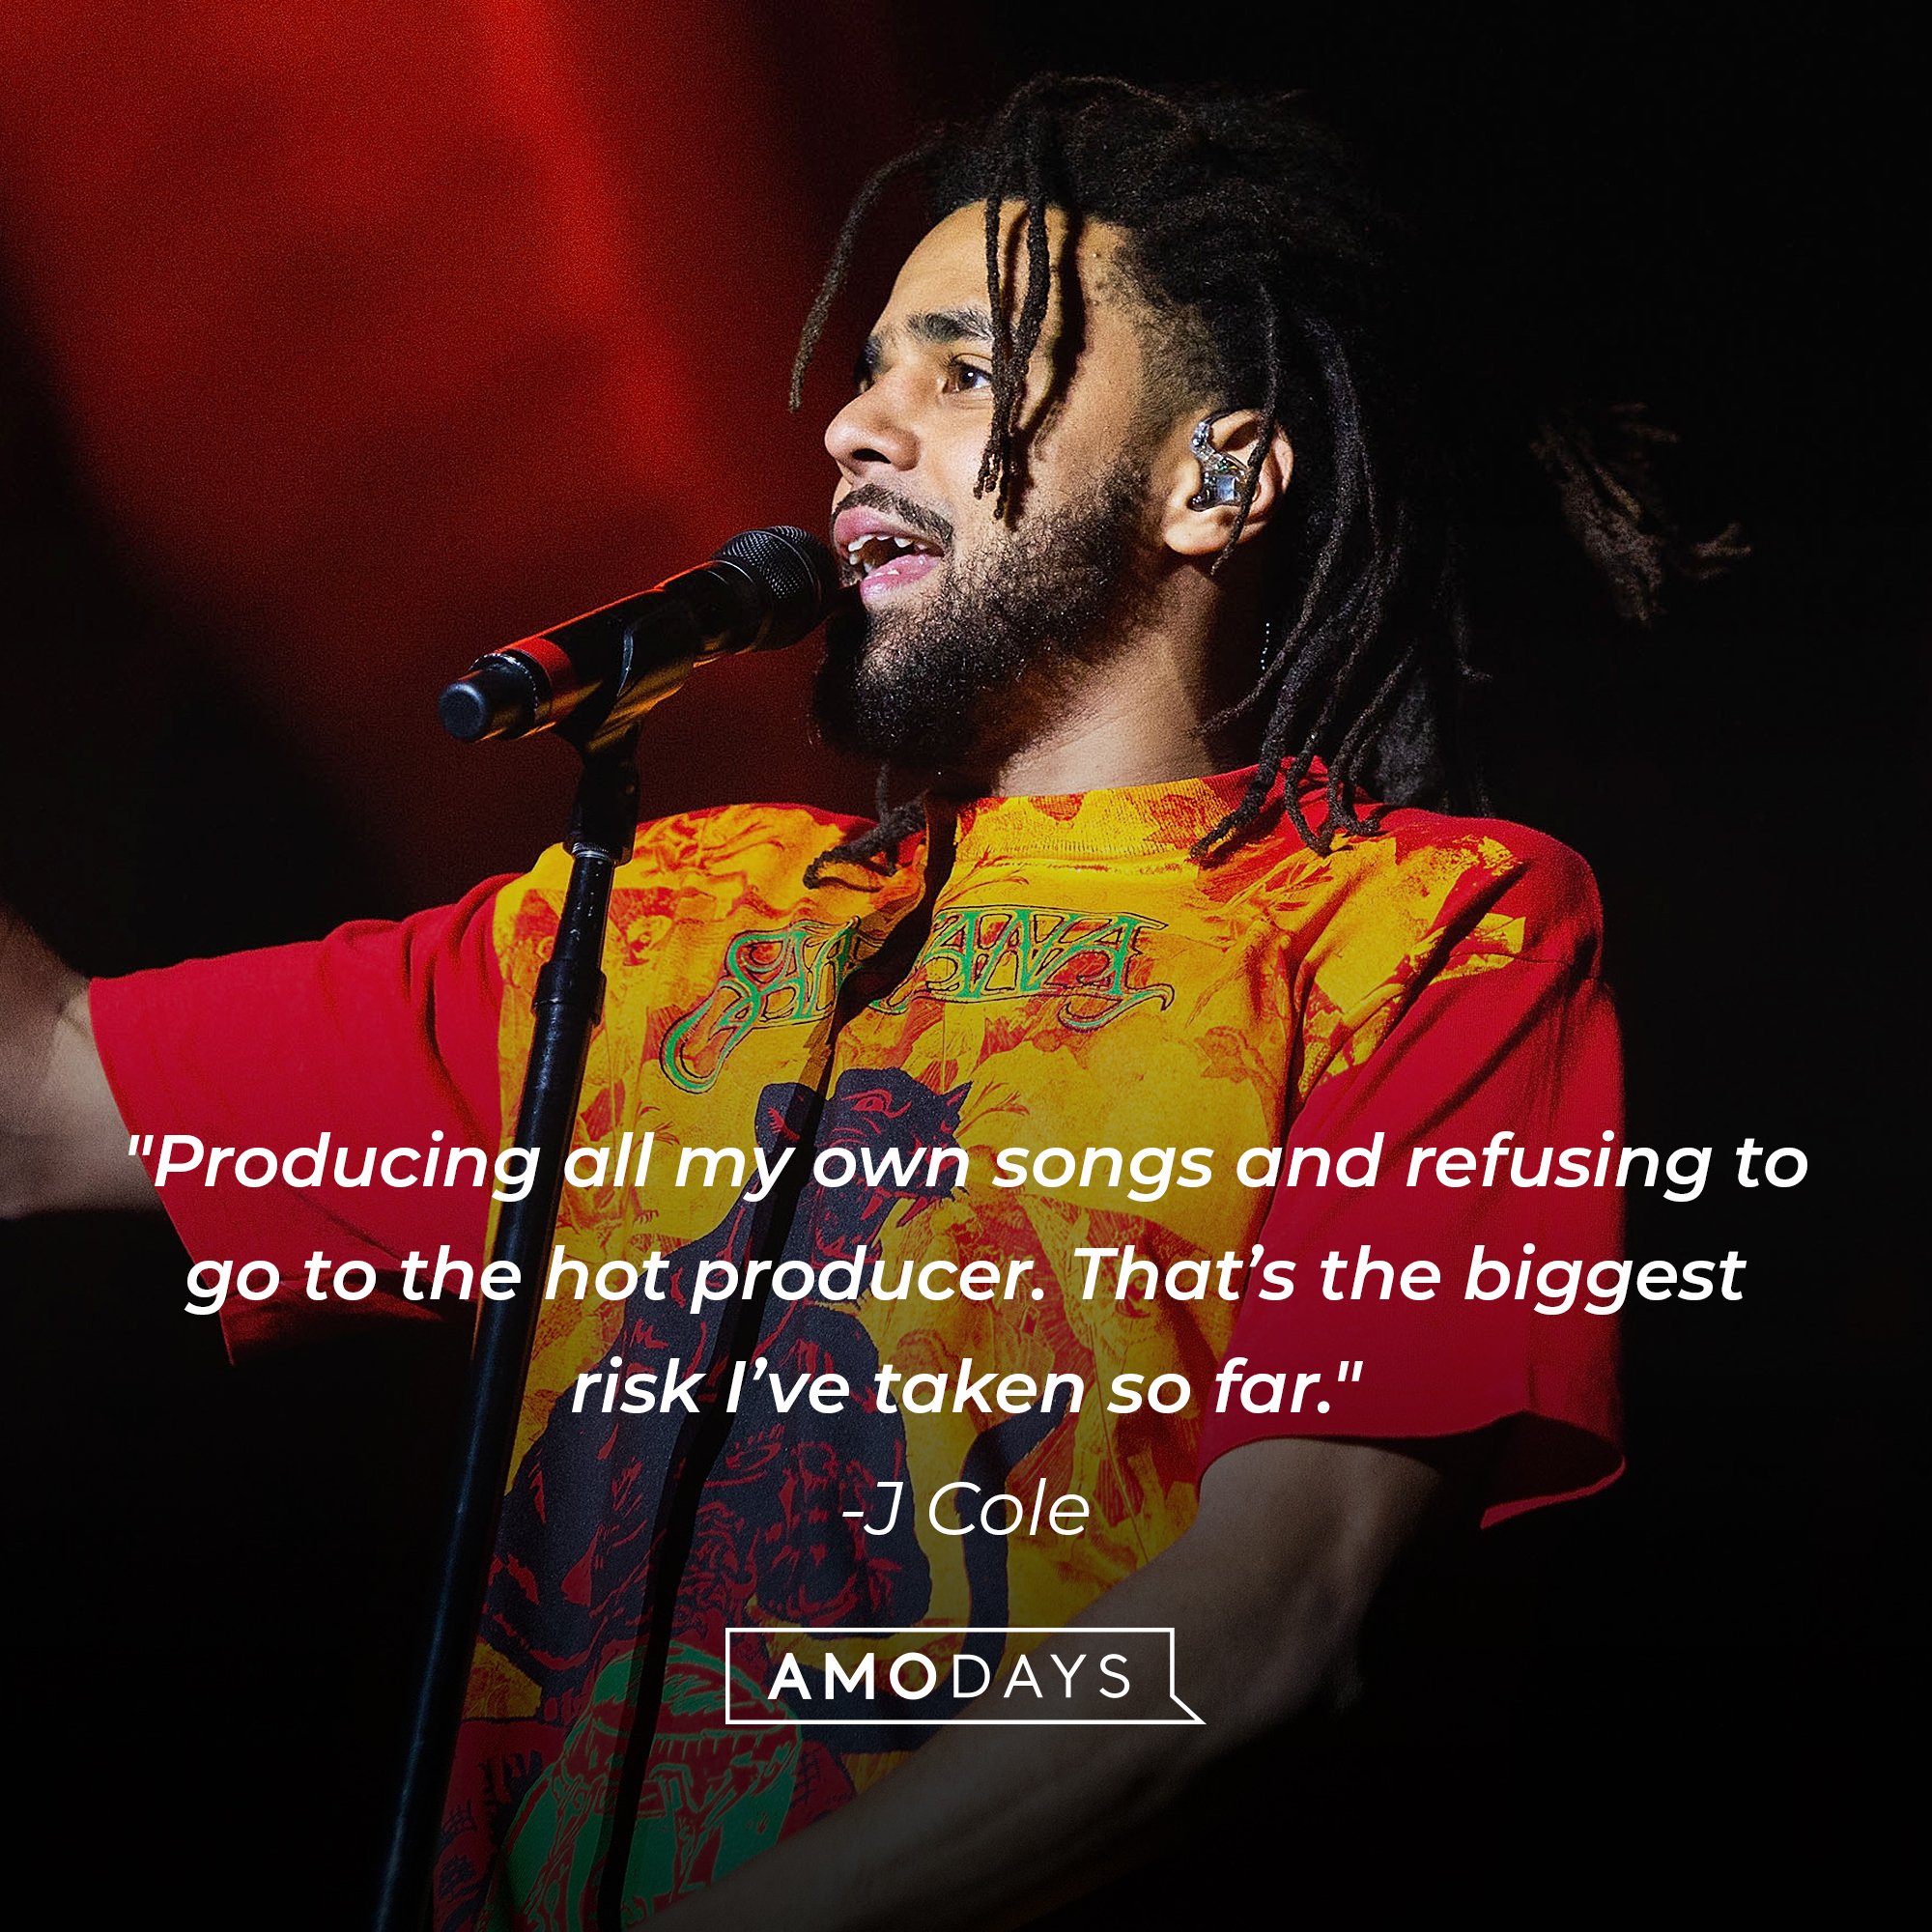 J Cole"s quote: "Producing all my own songs and refusing to go to the hot producer. That’s the biggest risk I’ve taken so far." | Image: AmoDays